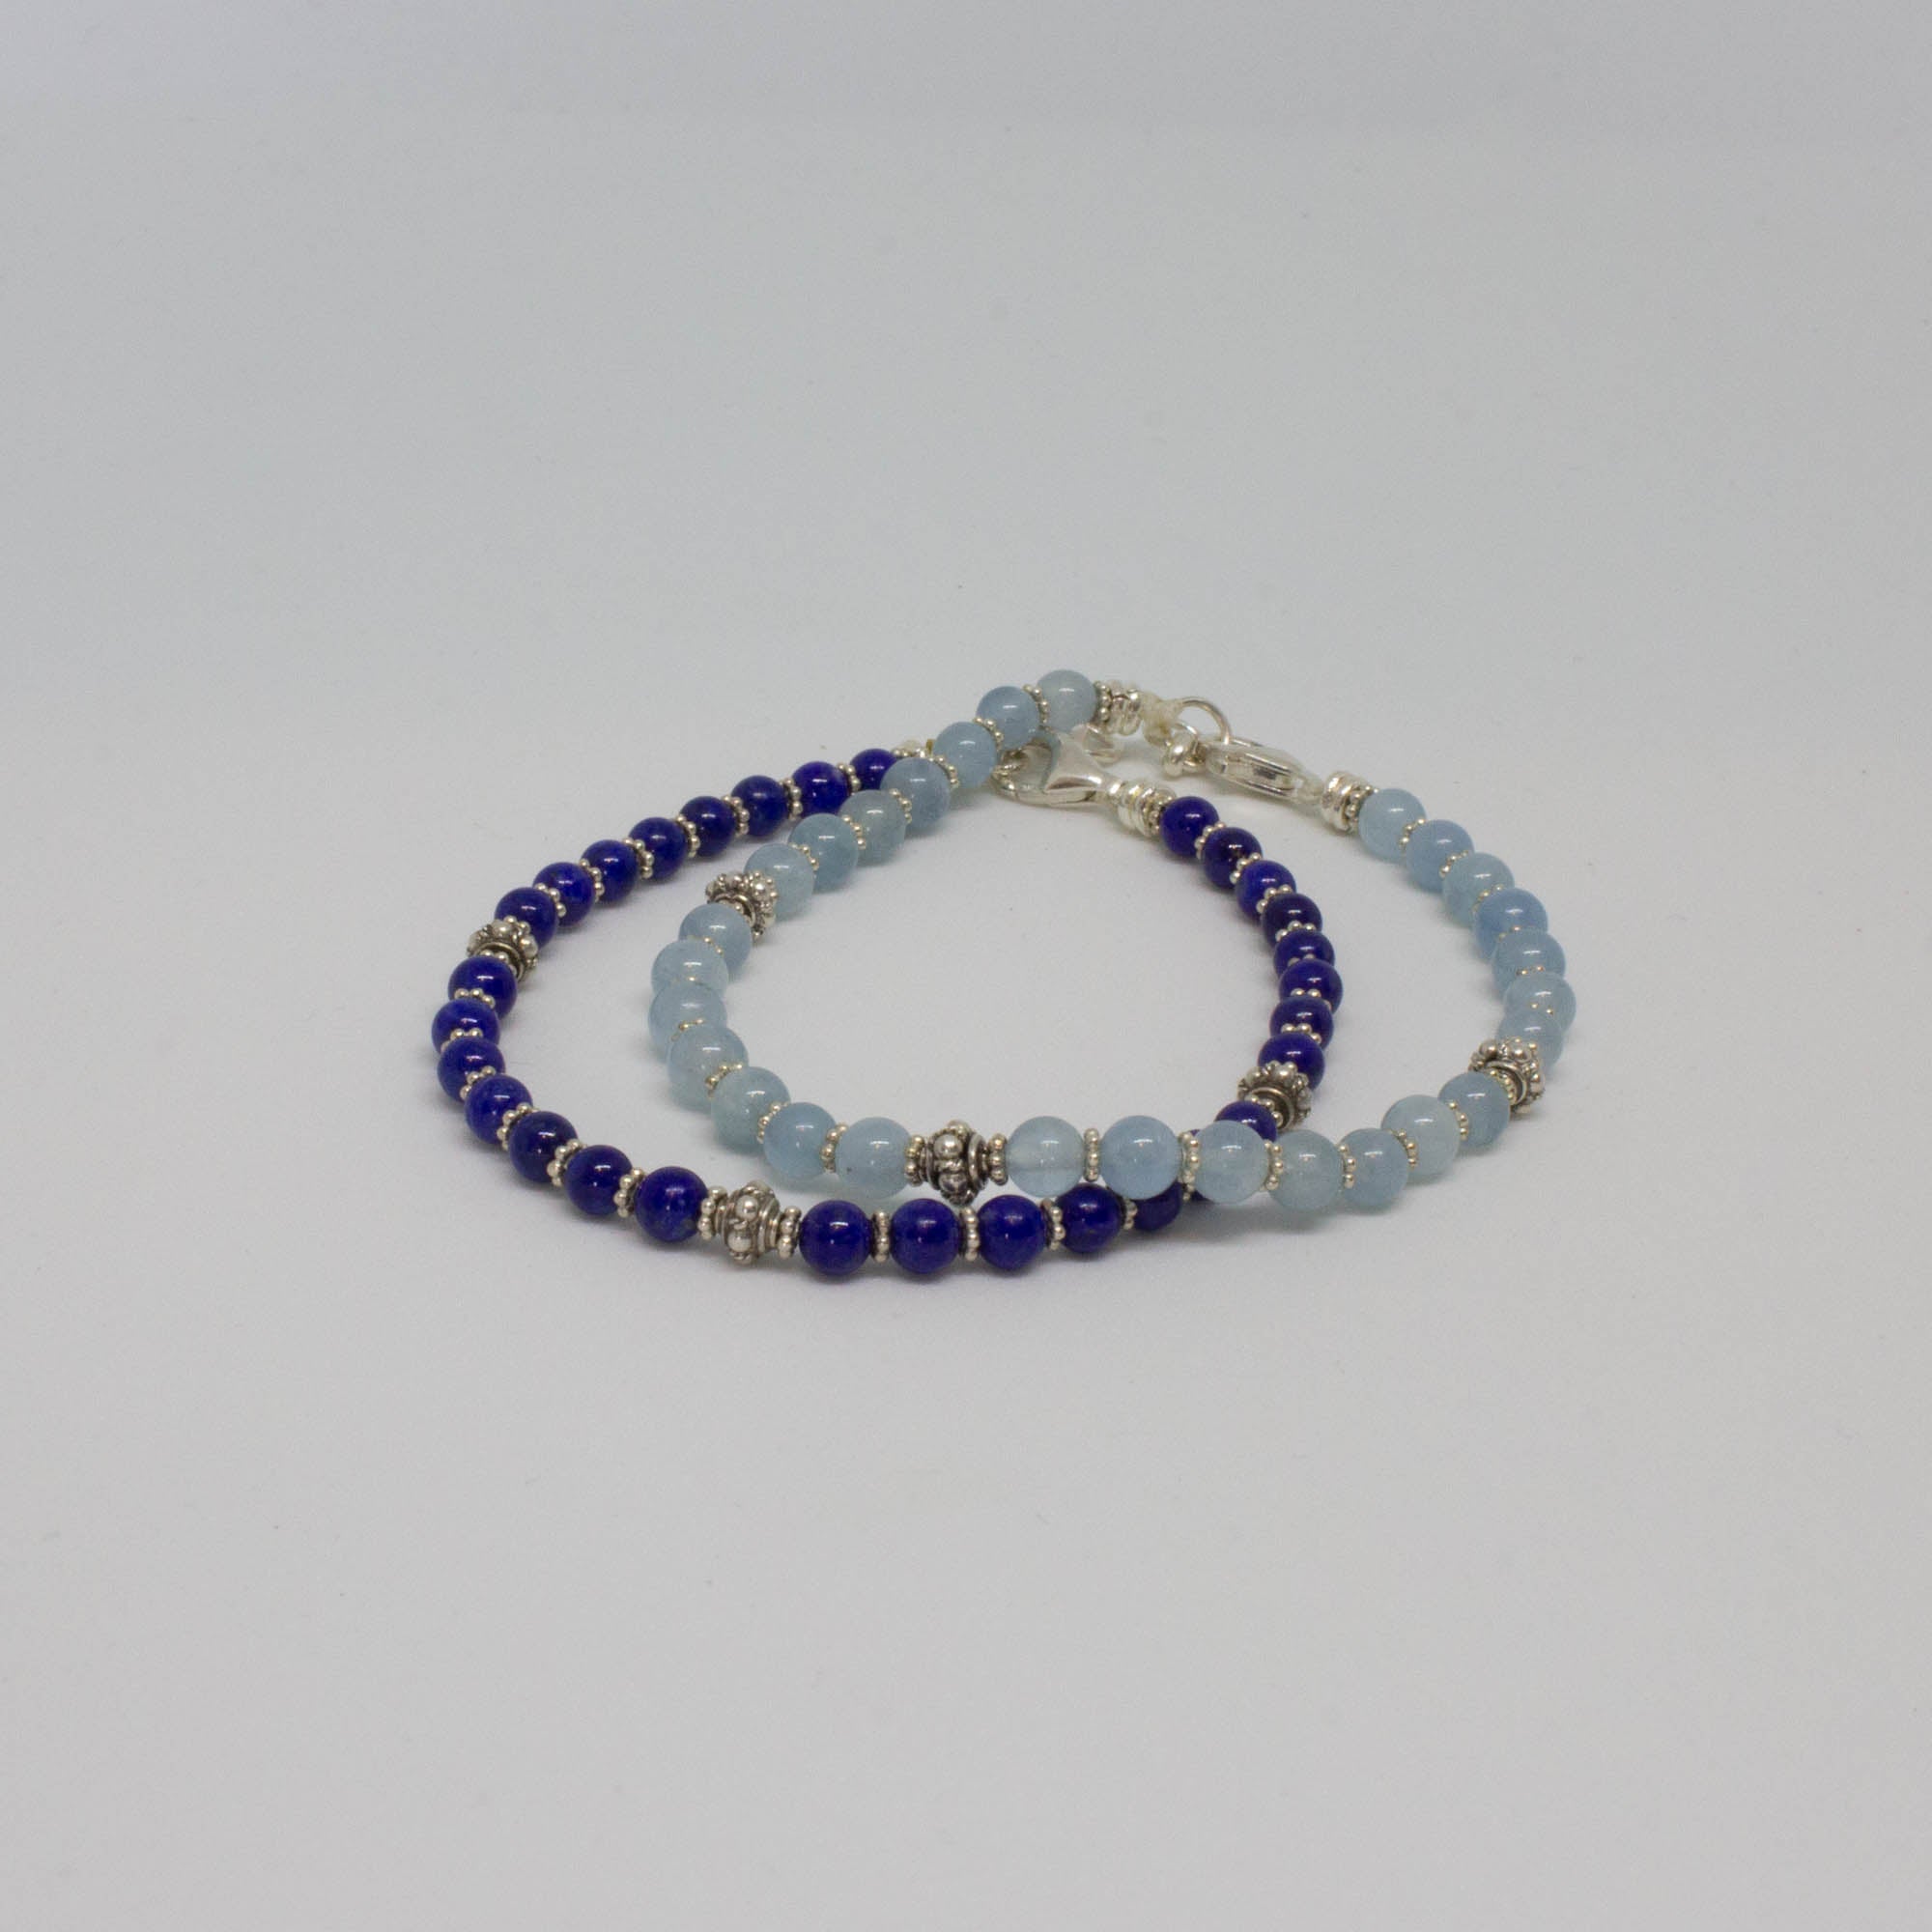 Blue chalcedony and lapis lazuli gemstone beaded stacking bracelets in sterling silver - Beyond Biasa